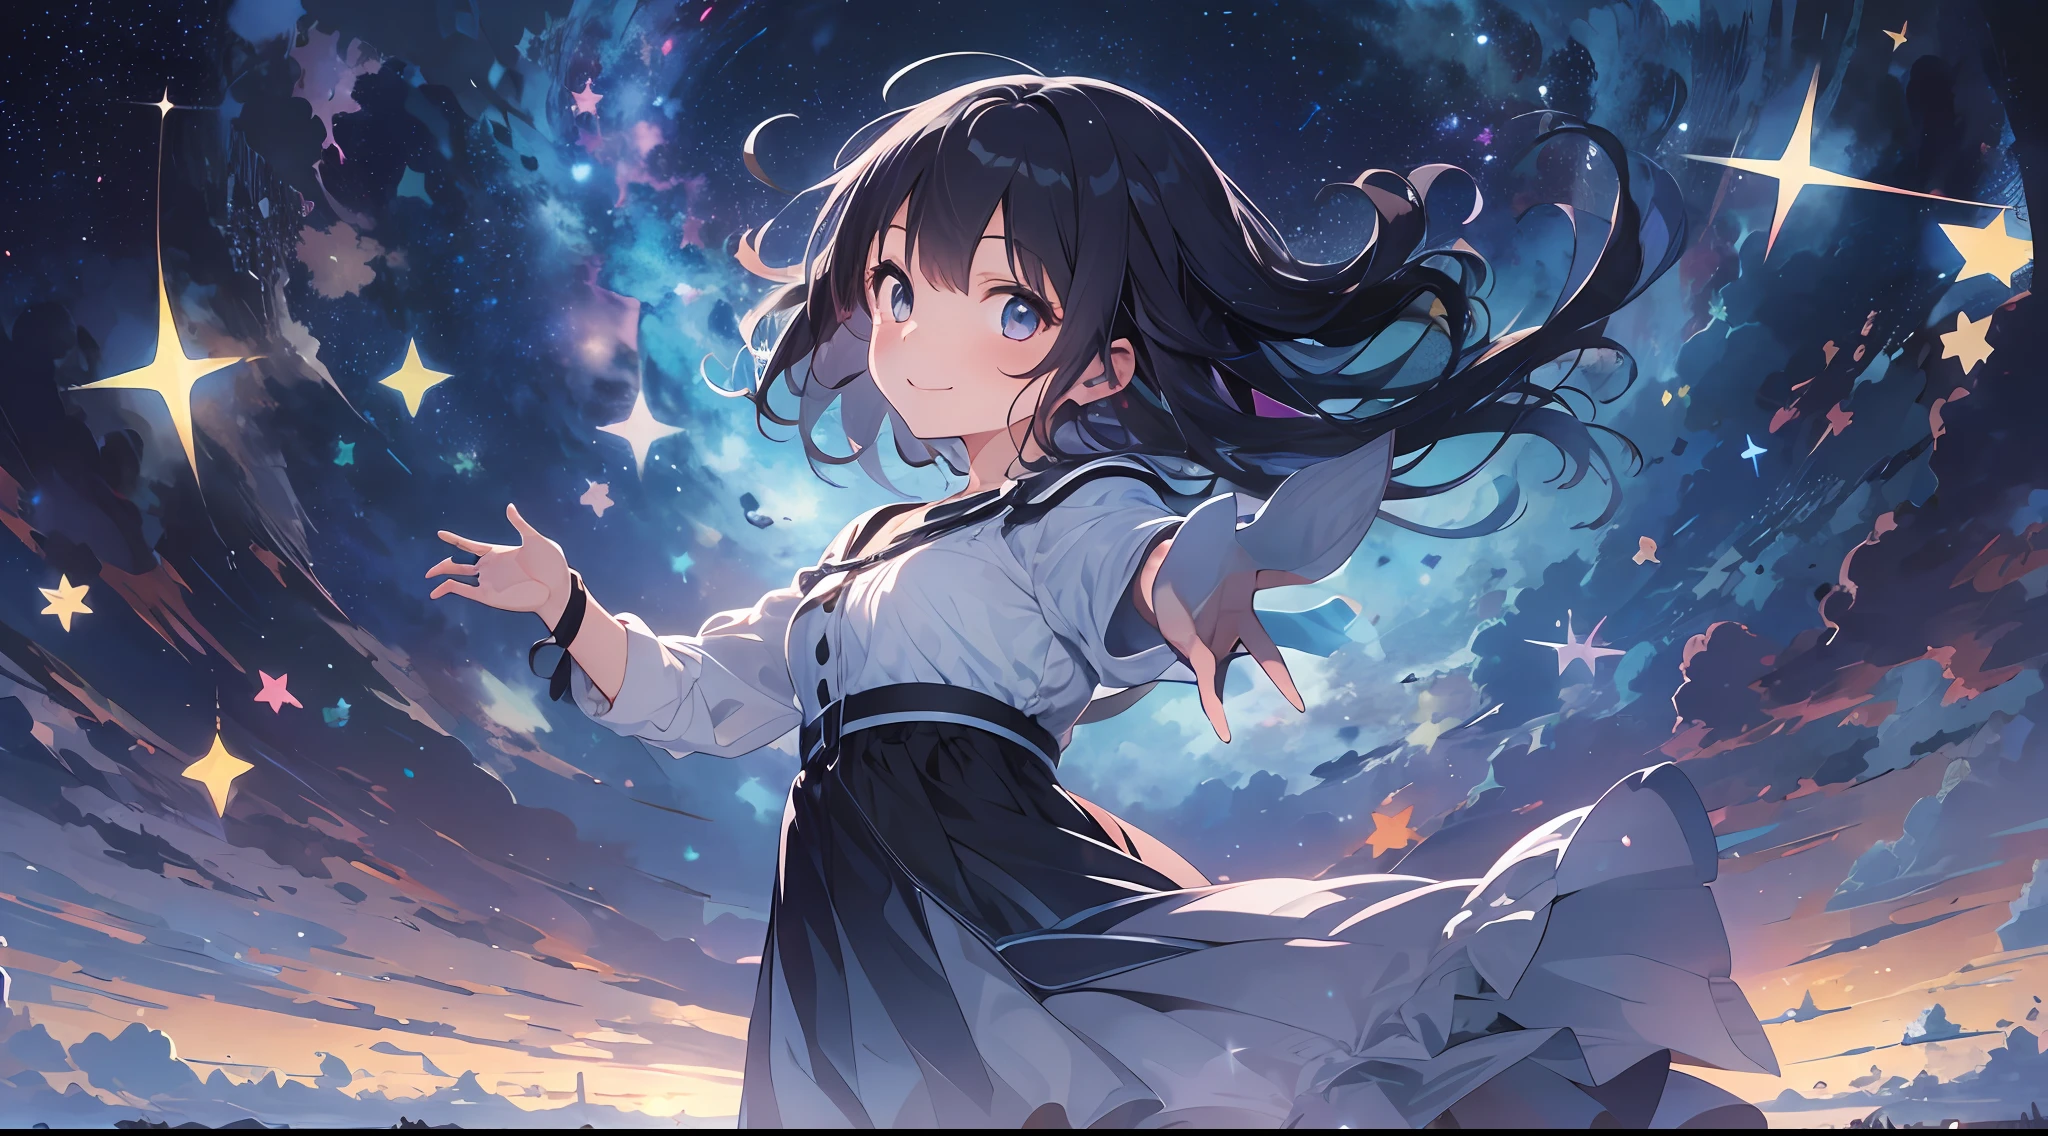 1girl, beautiful eye, smile, deep black, shimmering white and blue, curious, astonished, joyful, simple night-sky dress, black hair, casual short cut, silver eyes reflecting starlight, reaching out to the stars, infinite starry sky